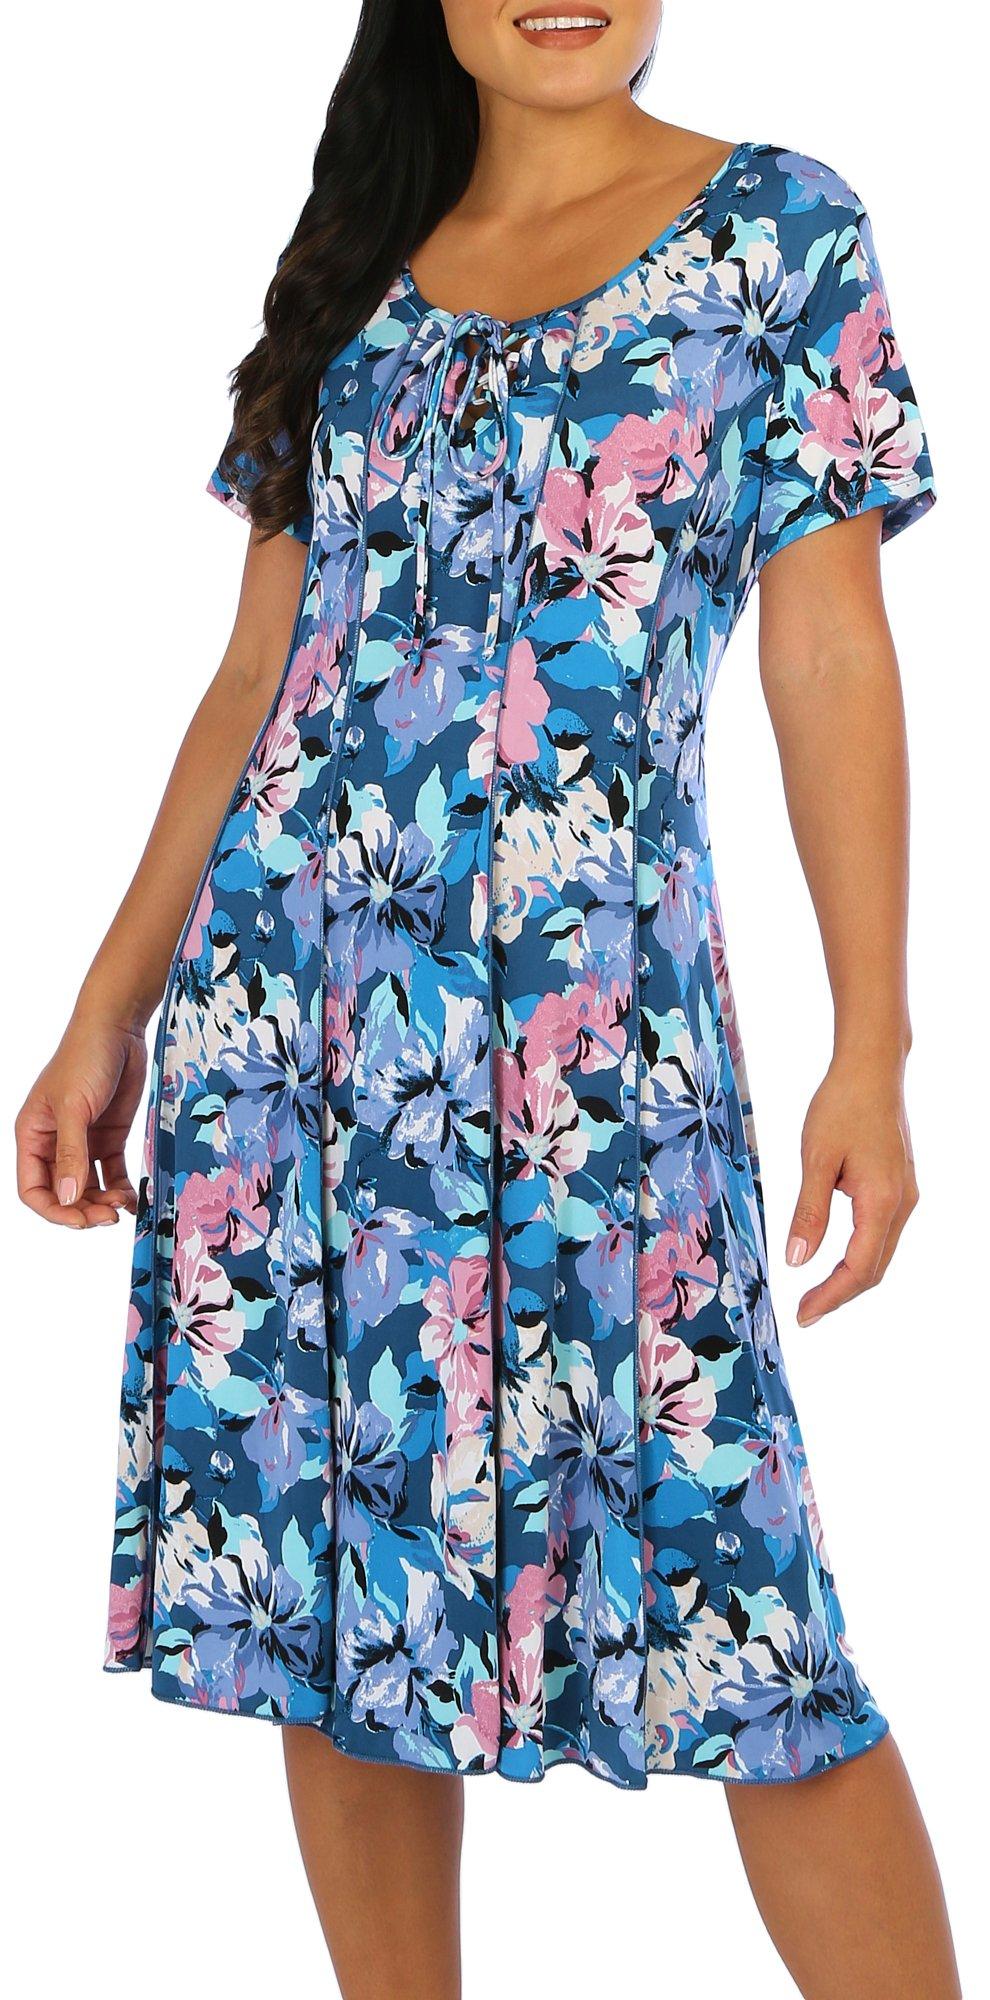 Womens Floral Seamed Pleated Short Sleeve Dress